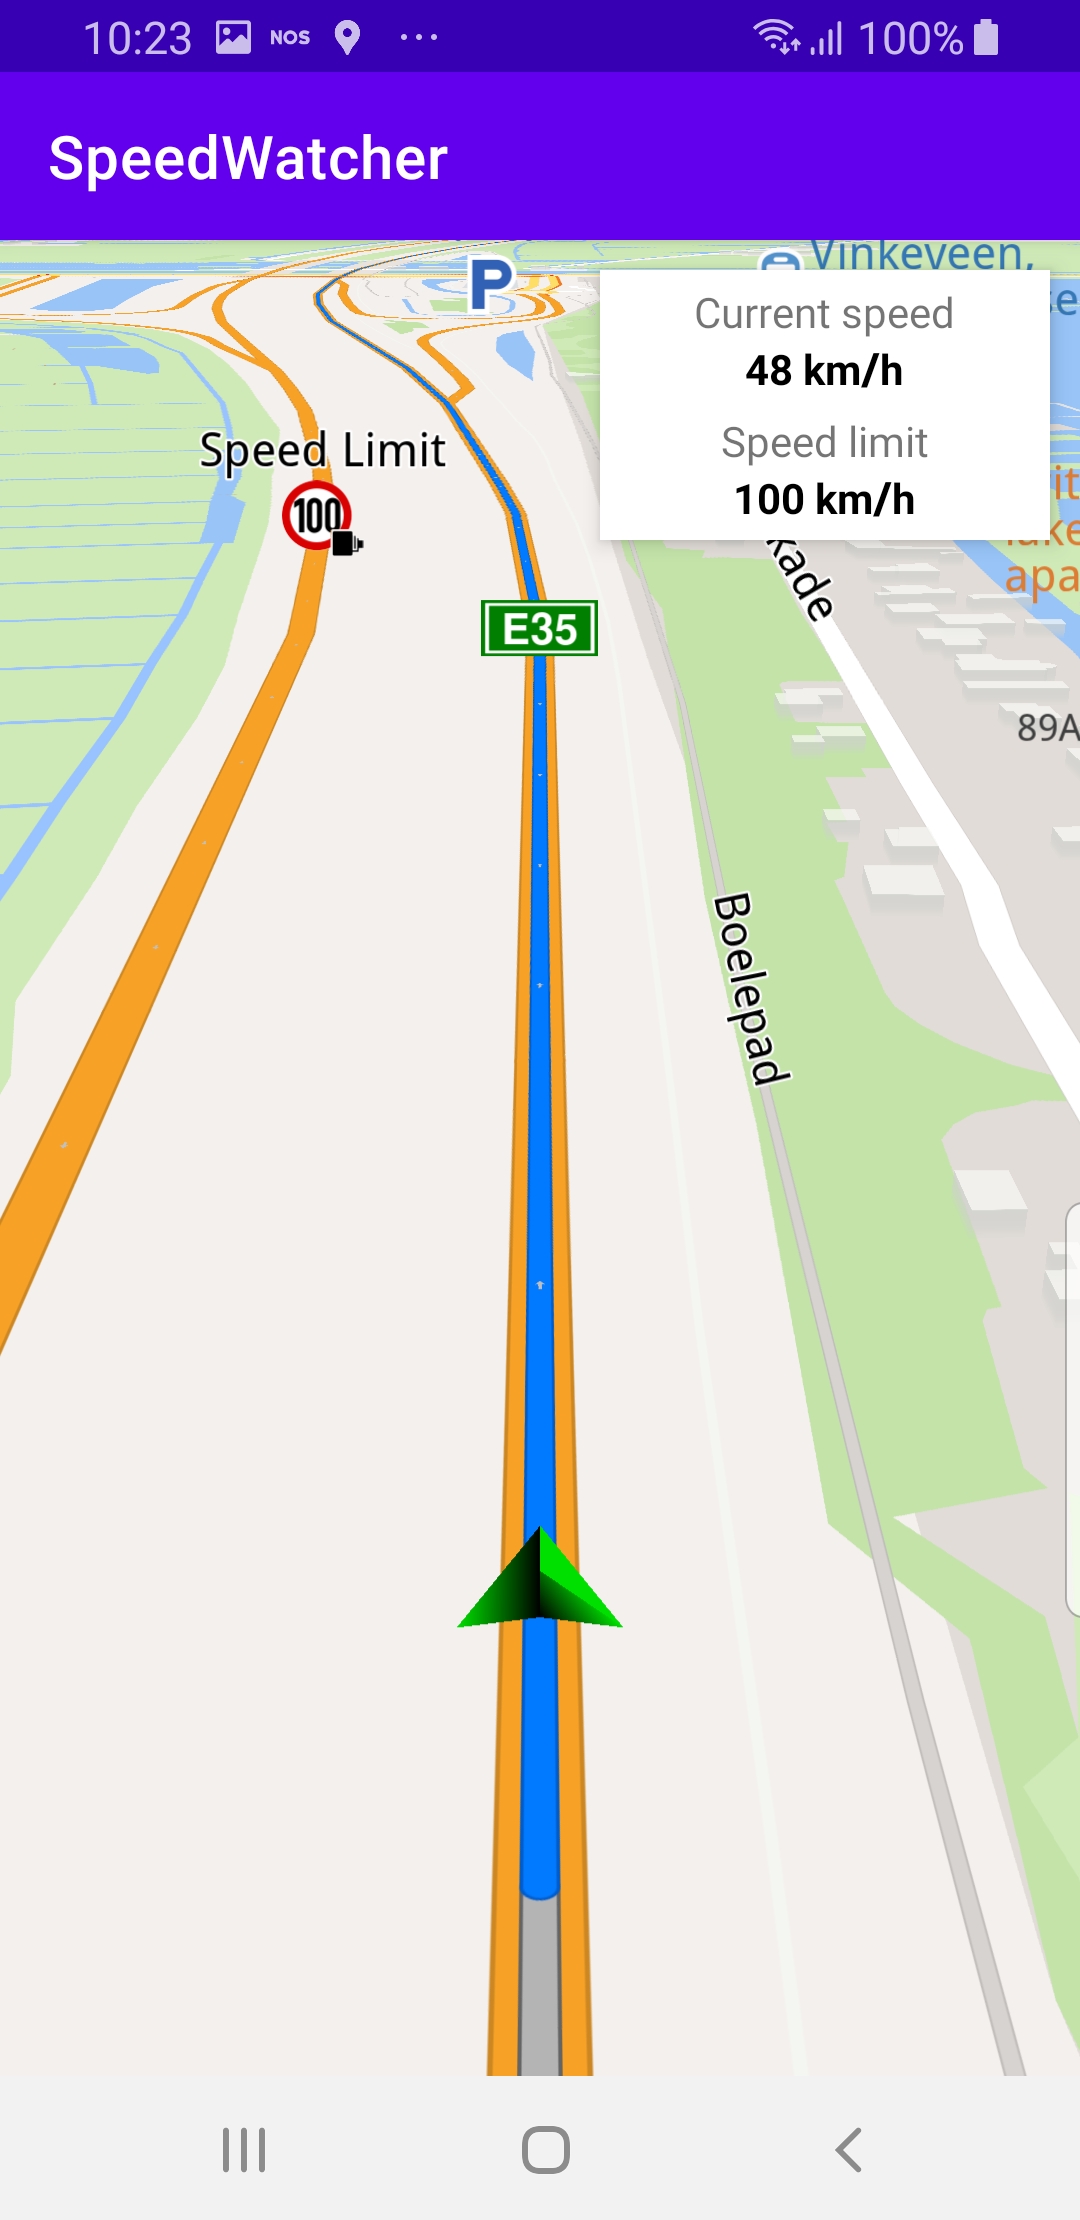 Speed watcher simulated navigation example Android screenshot